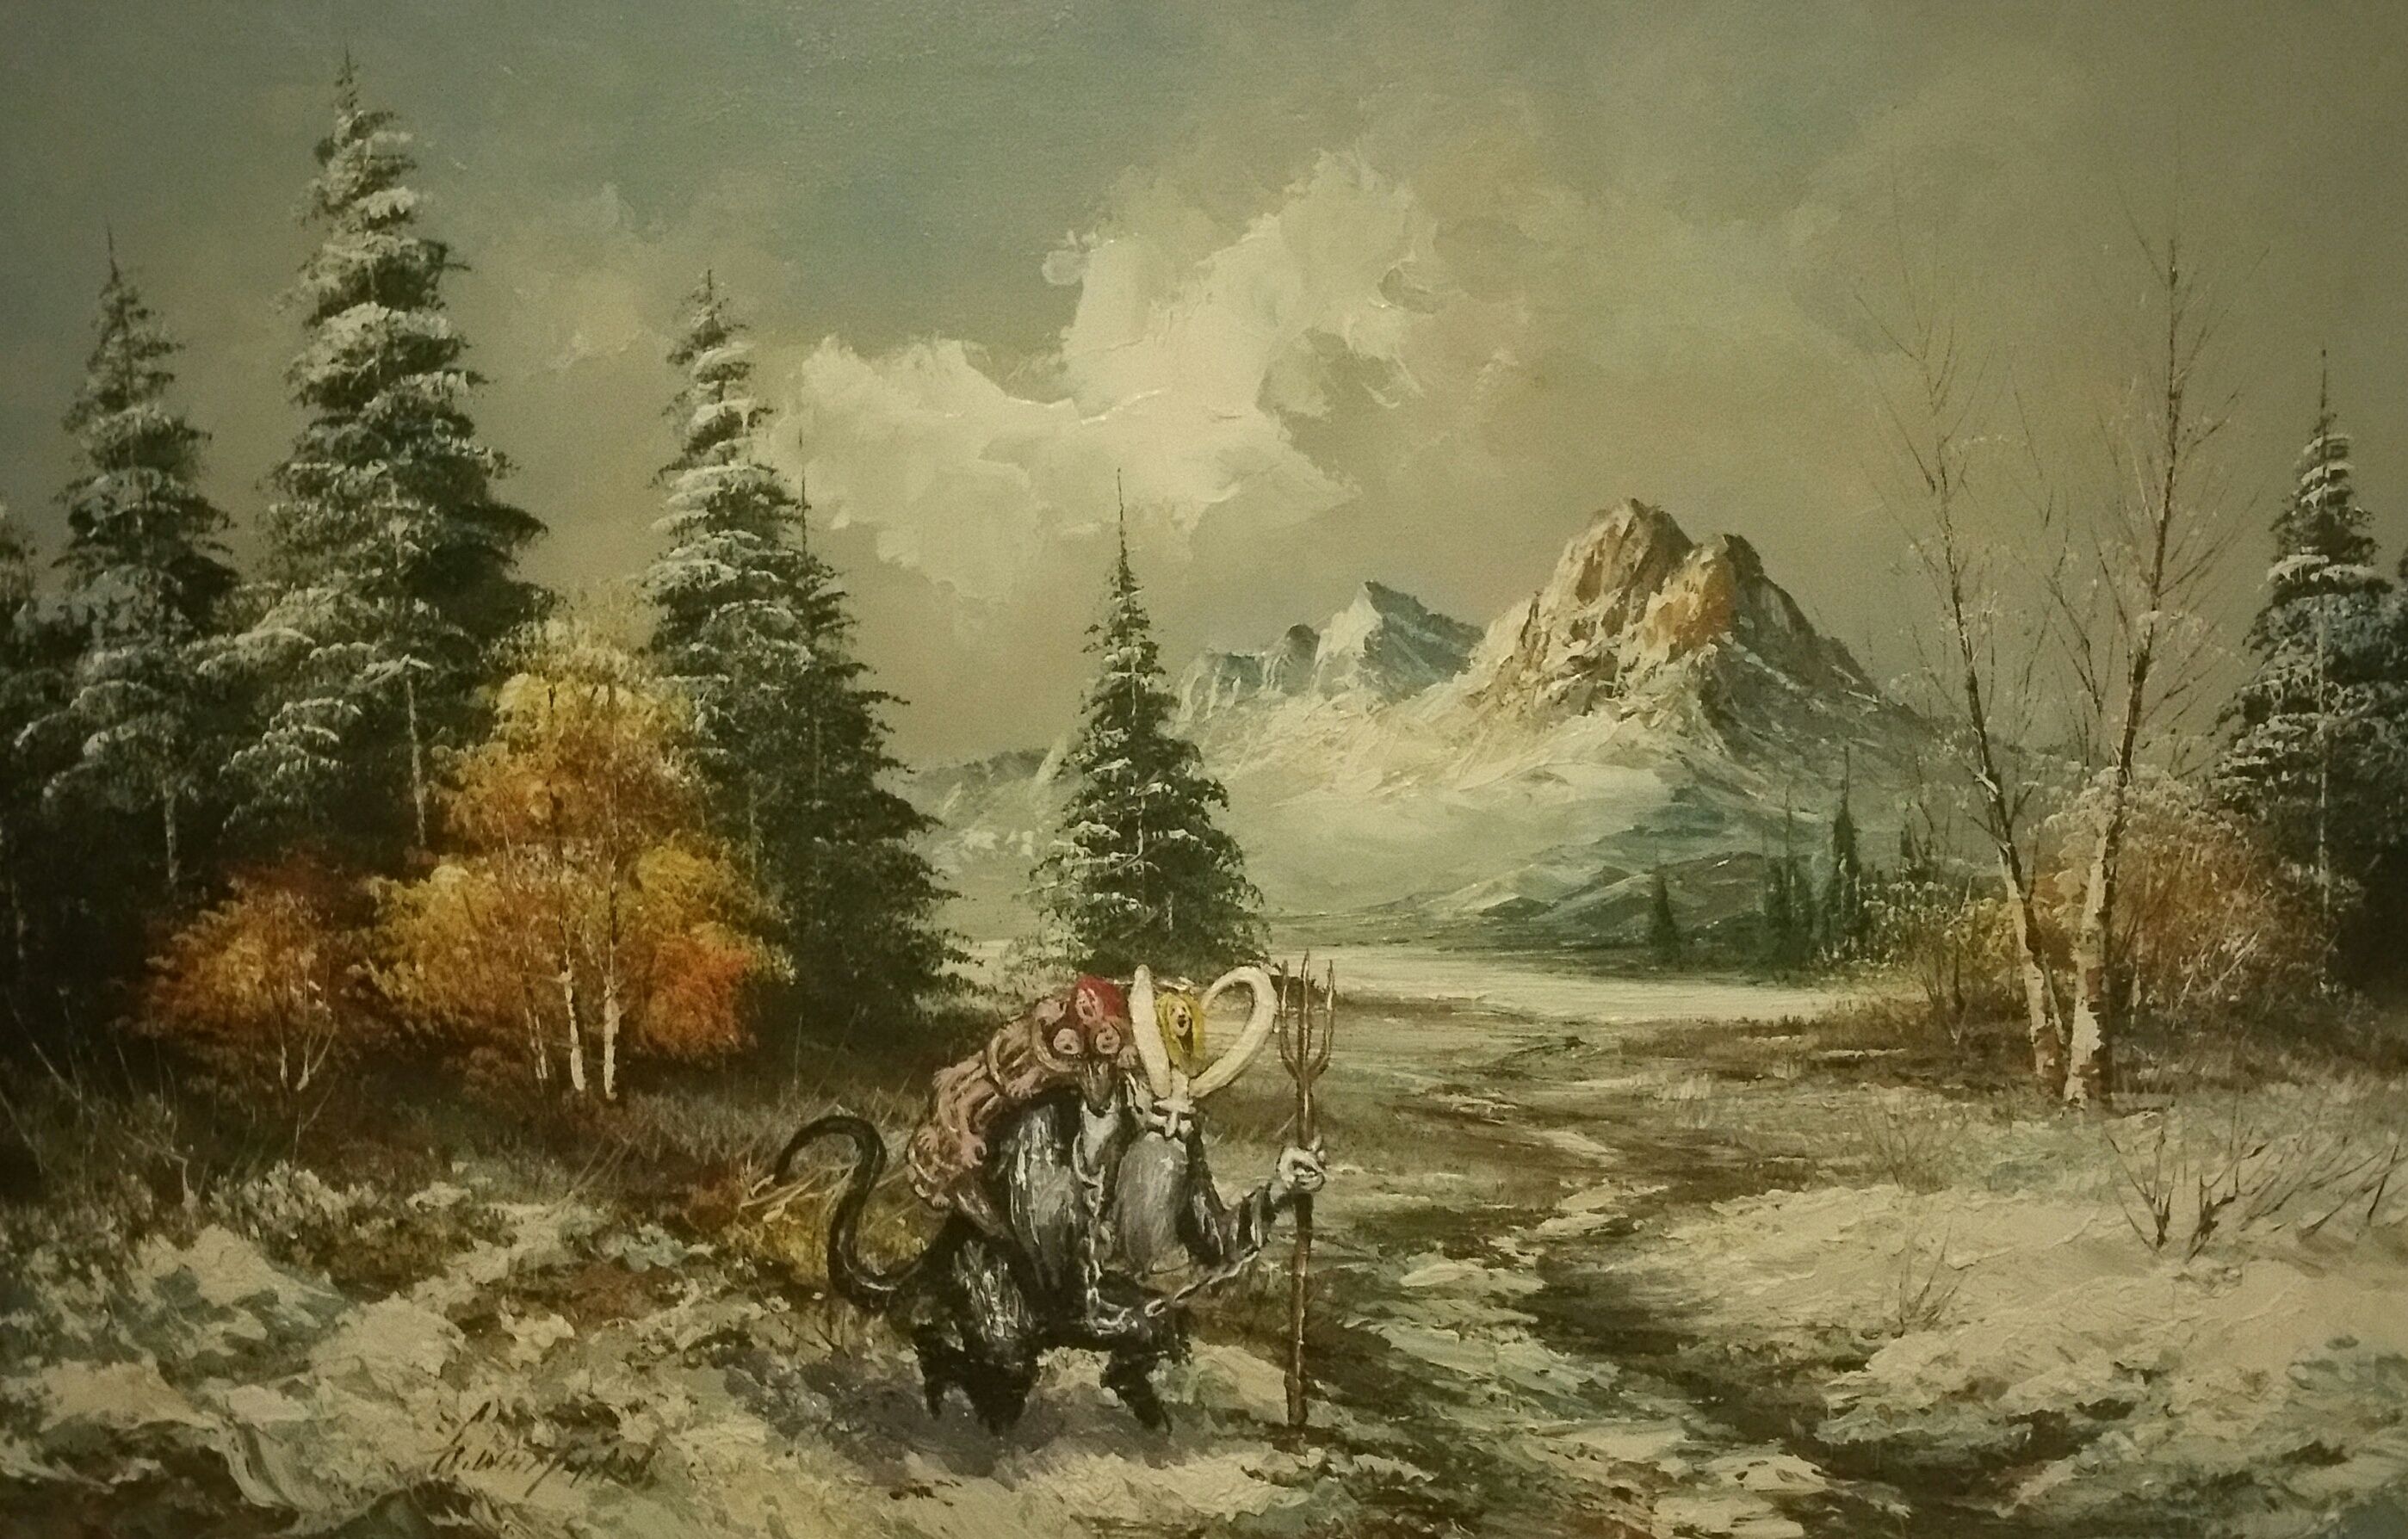 I added Krampus to this thrift store painting.